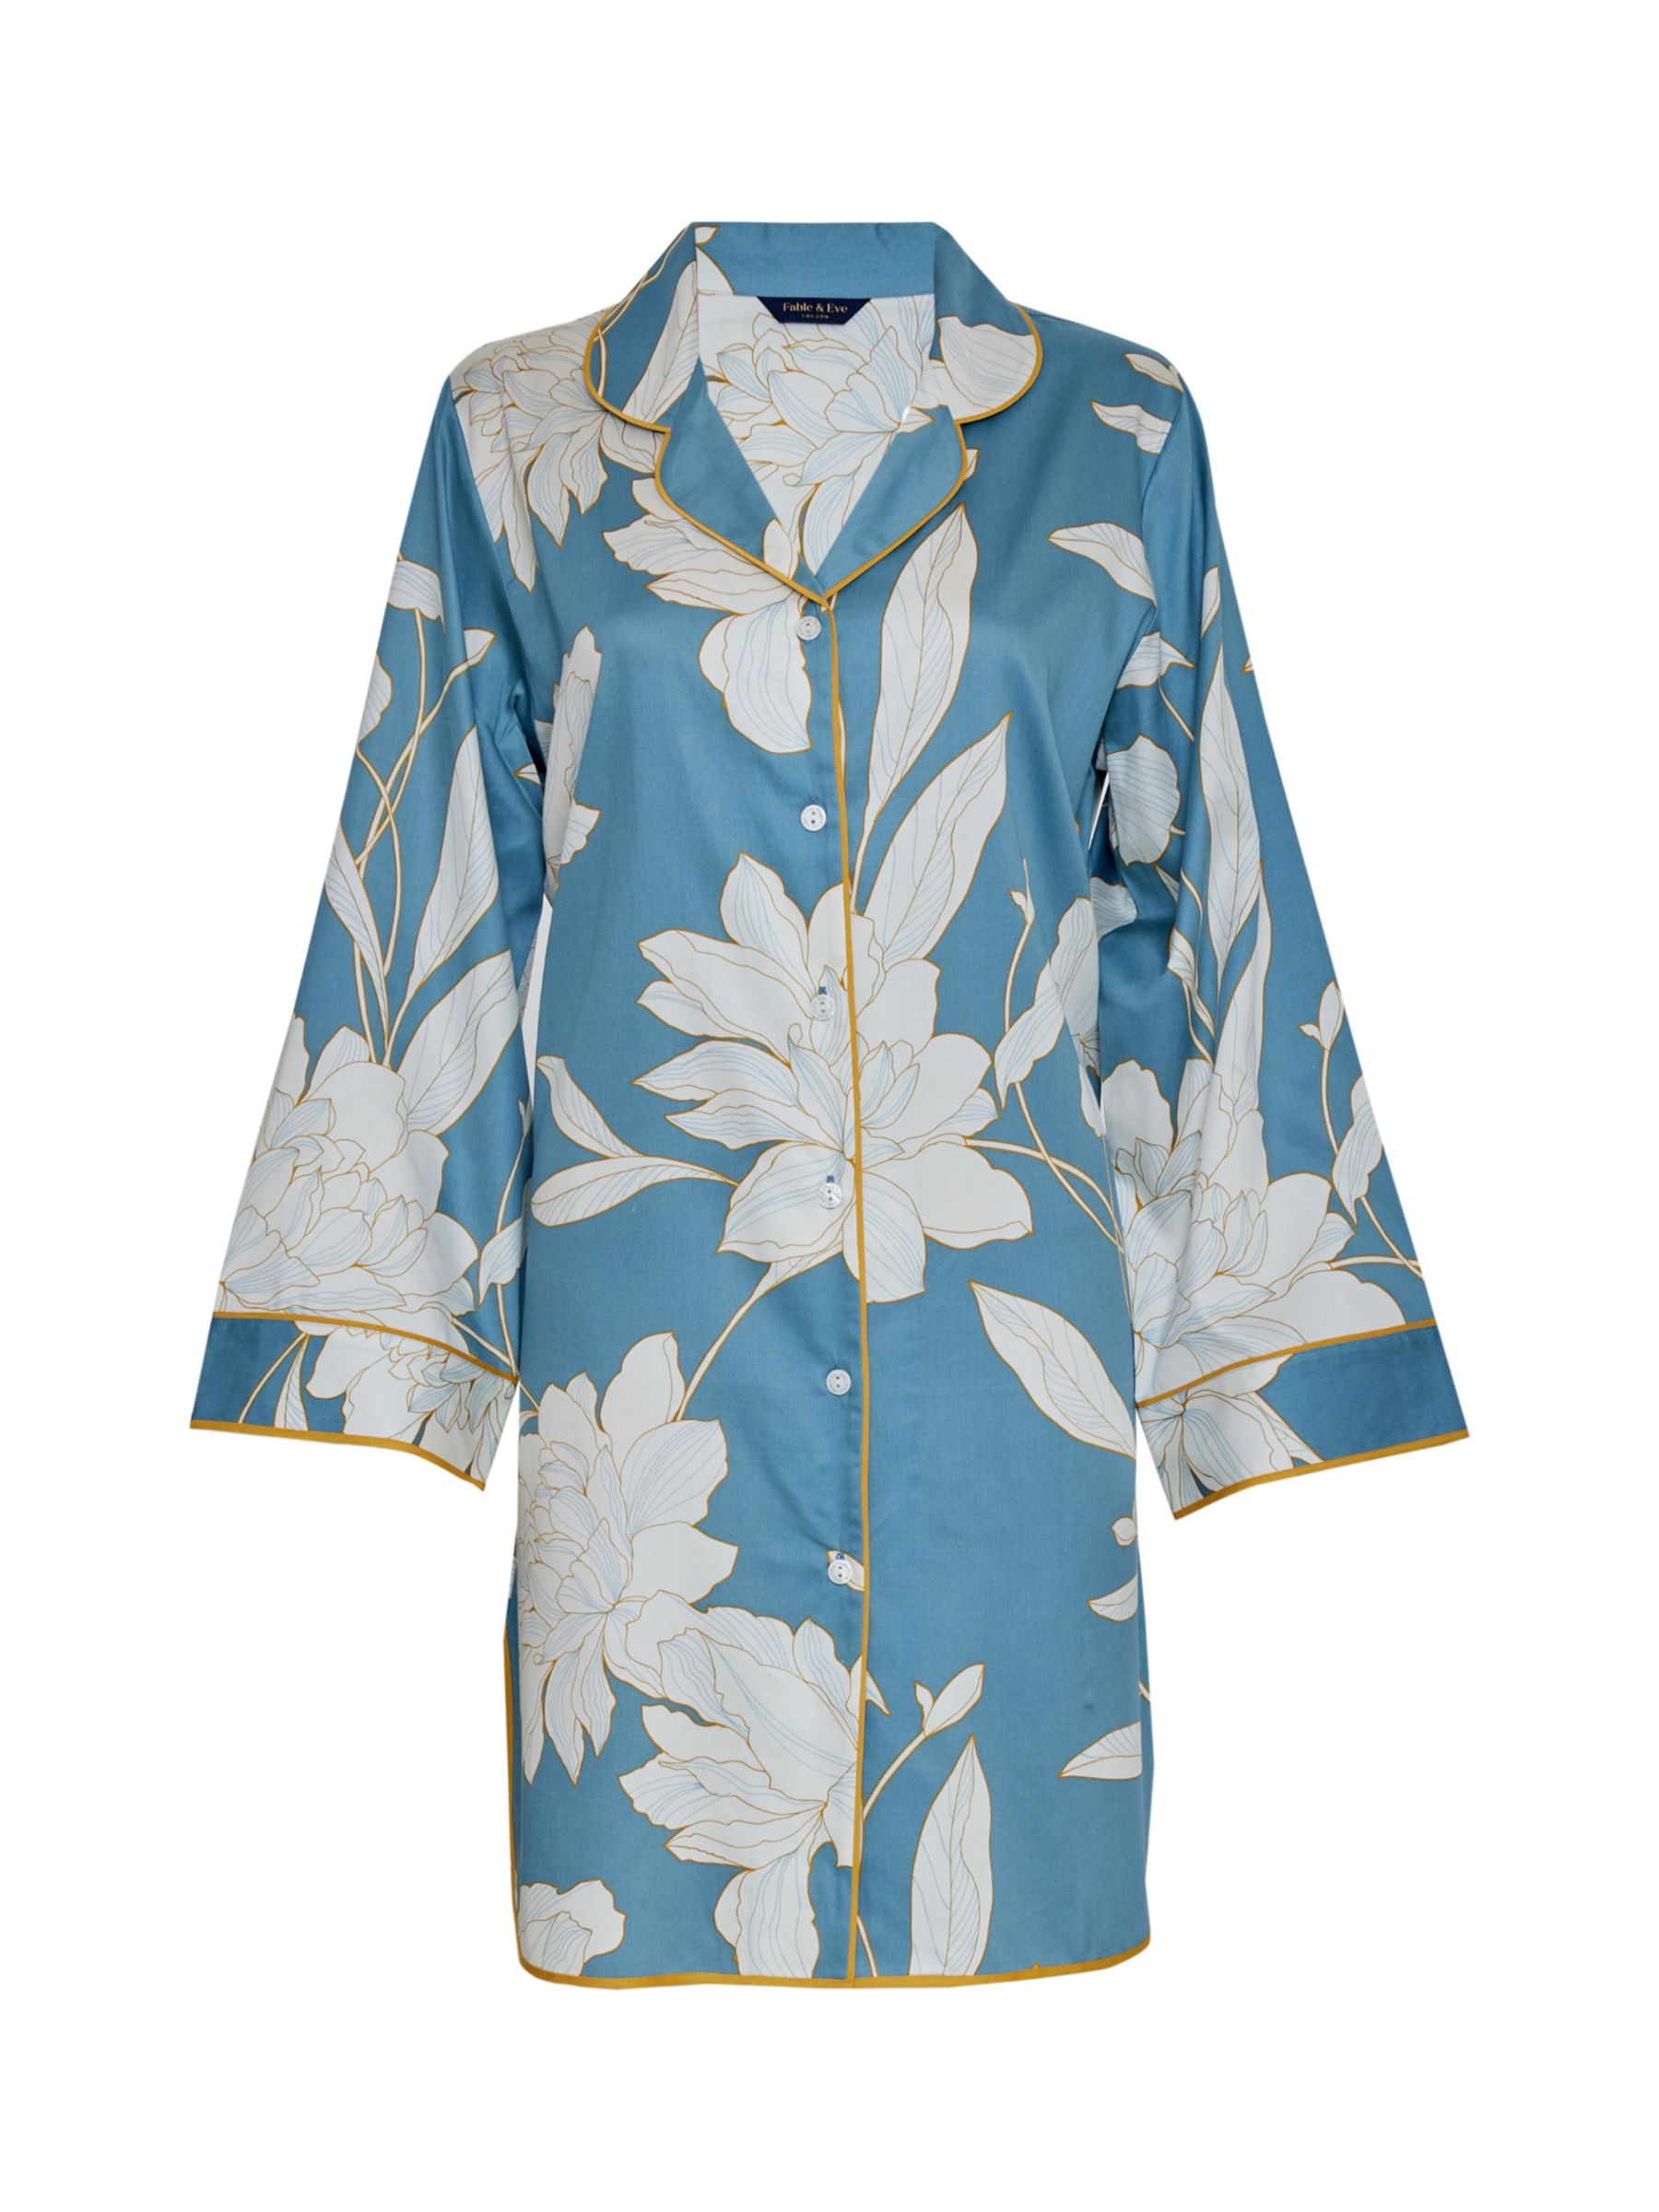 Fable & Eve Greenwich Floral Nightshirt, Cerulean Blue at John Lewis ...